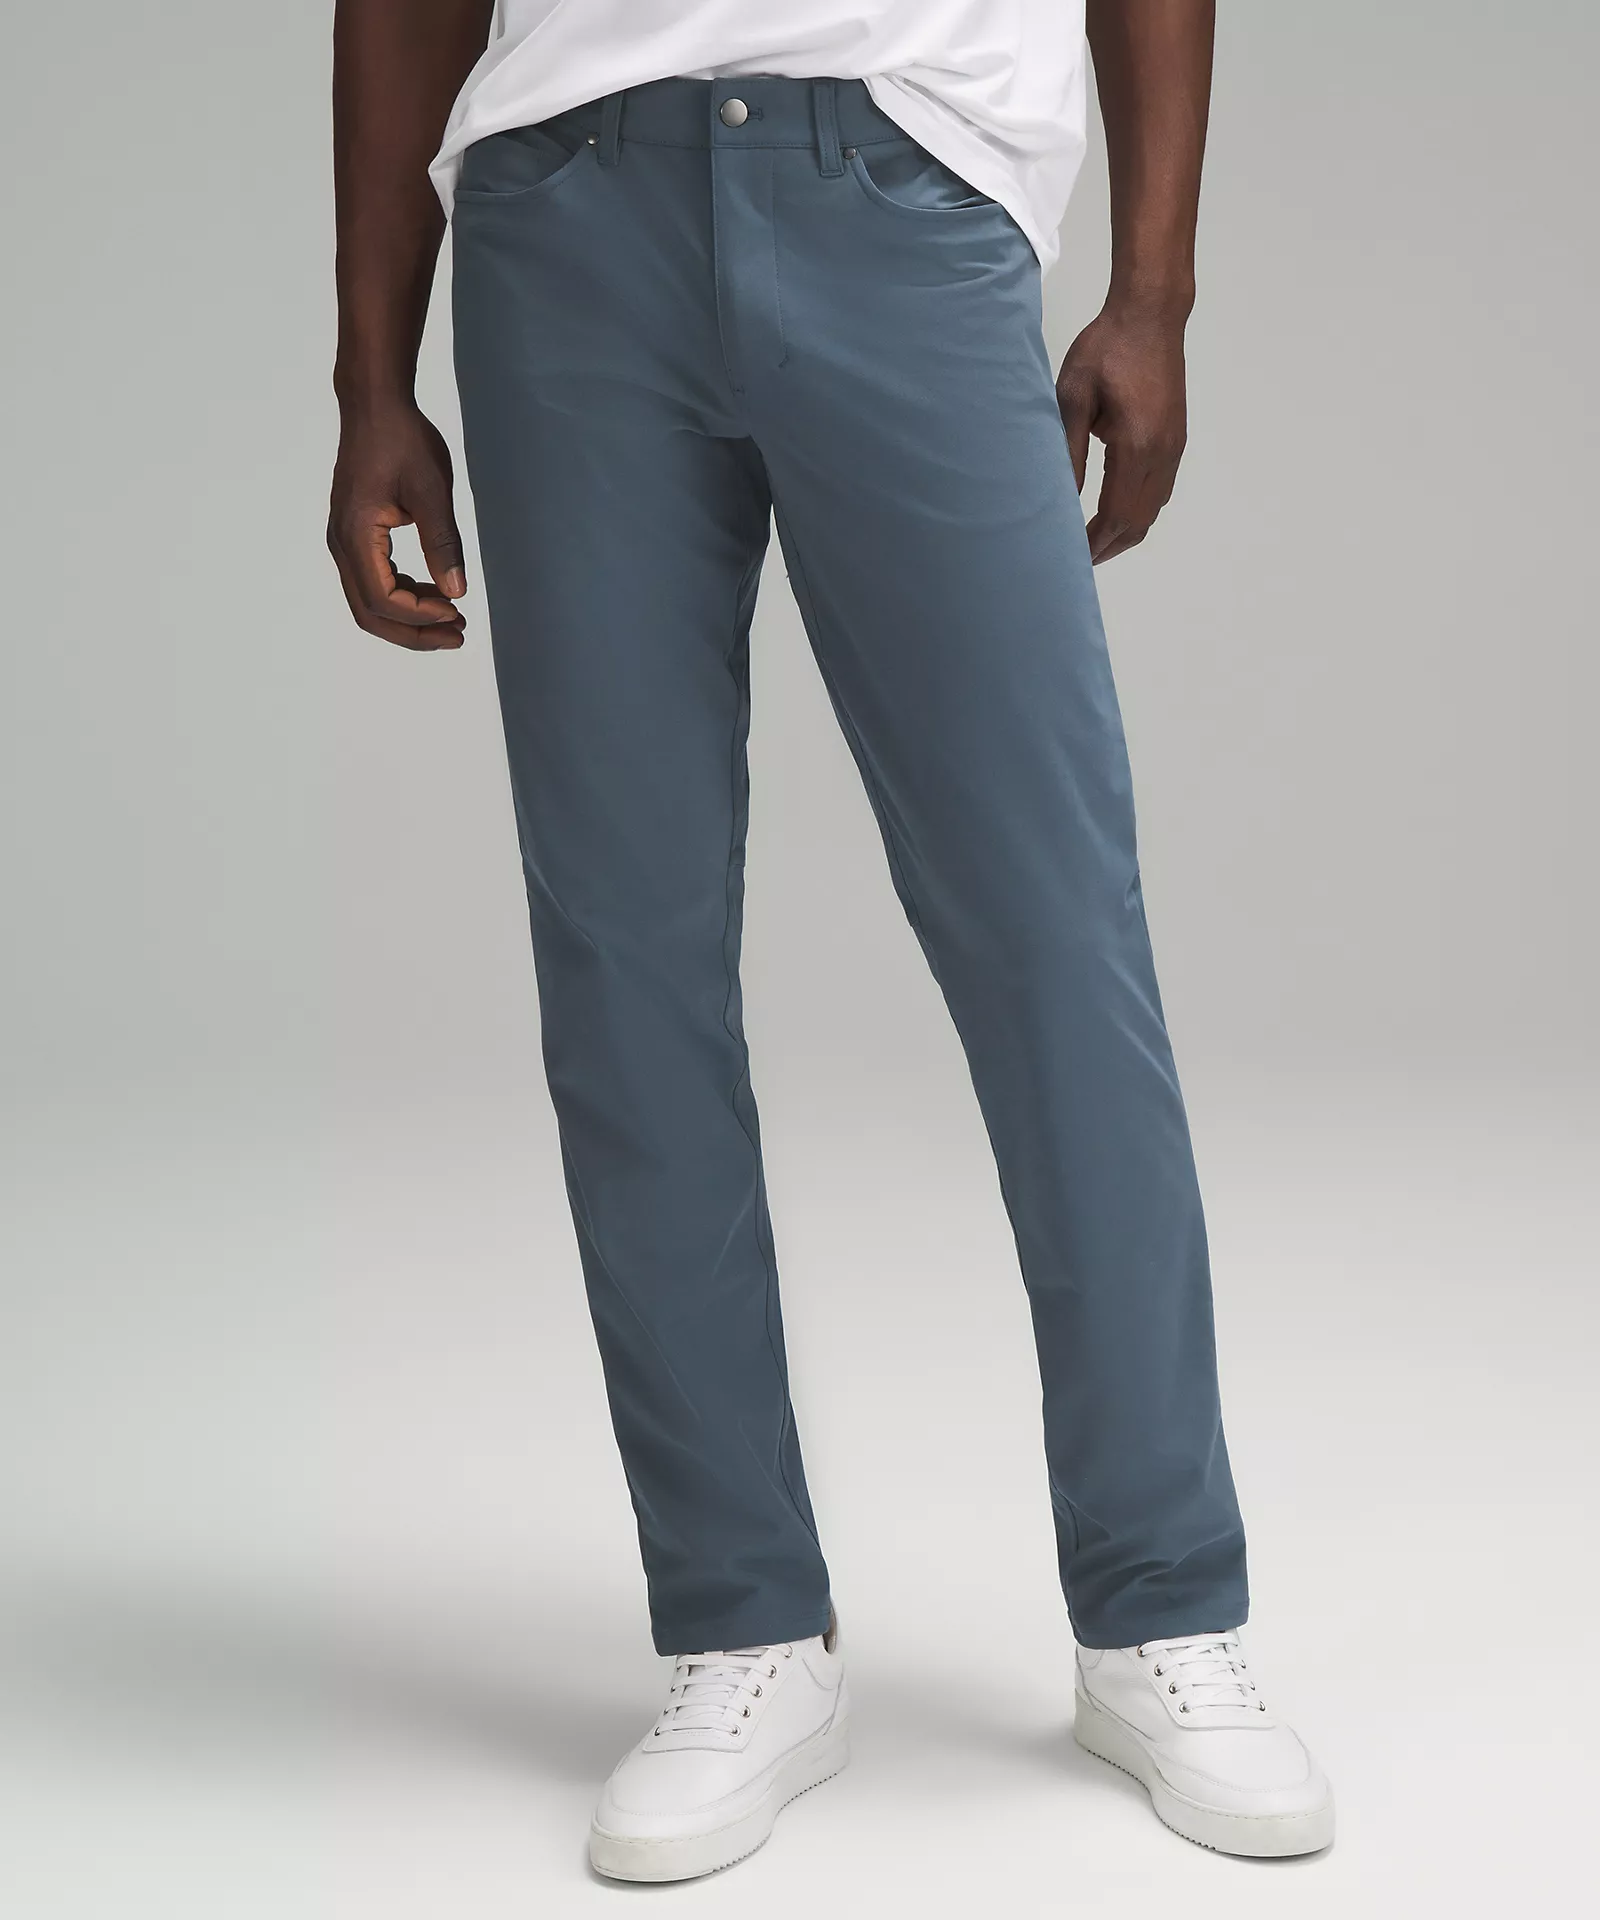 ABC Classic-Fit Pant in Iron Blue